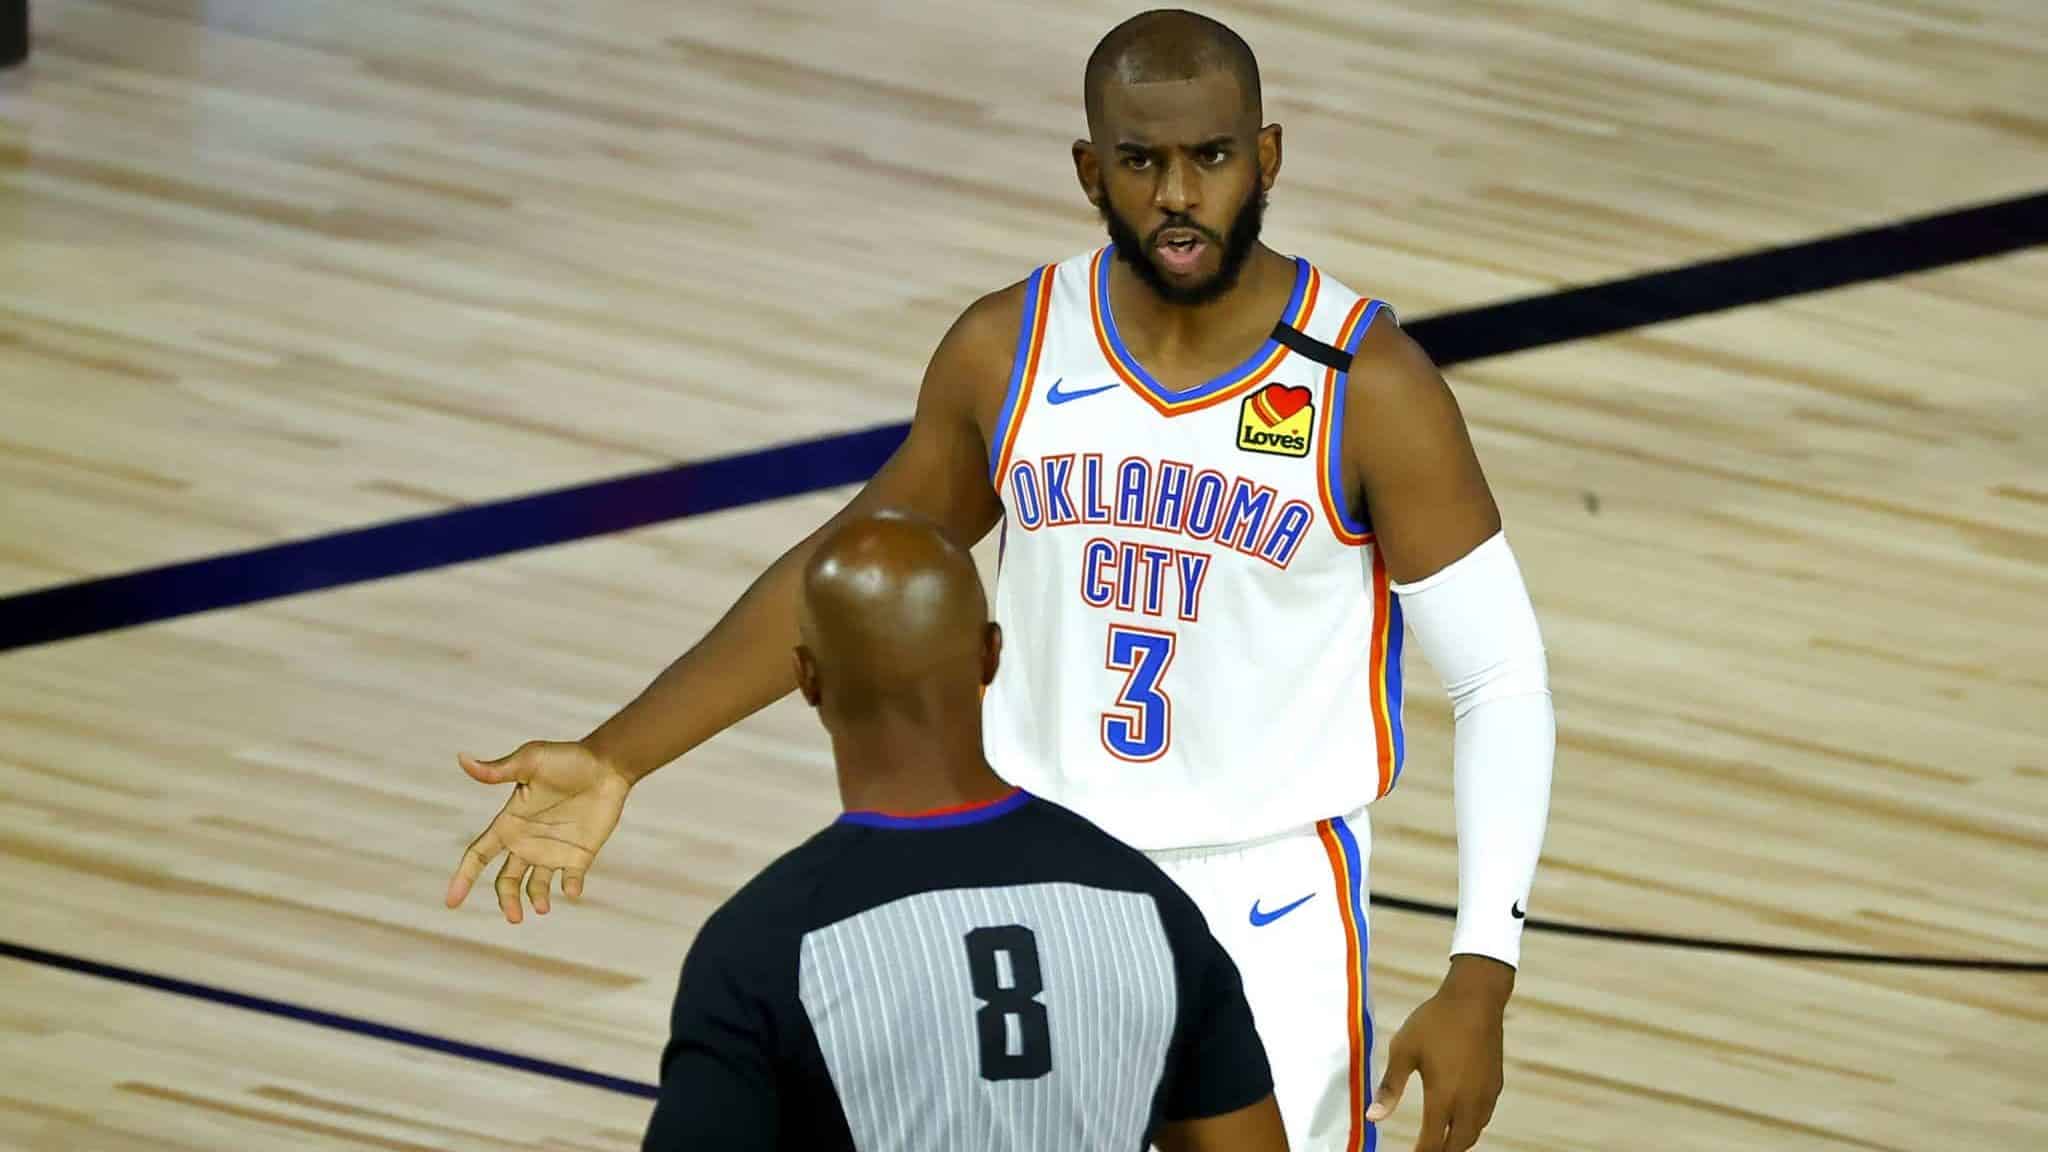 LAKE BUENA VISTA, FLORIDA - AUGUST 05: Chris Paul #3 of the Oklahoma City Thunder discusses a call with referee Marc Davis #8 during the second quarter against the Los Angeles Lakers at HP Field House at ESPN Wide World Of Sports Complex on August 05, 2020 in Lake Buena Vista, Florida. NOTE TO USER: User expressly acknowledges and agrees that, by downloading and or using this photograph, User is consenting to the terms and conditions of the Getty Images License Agreement.